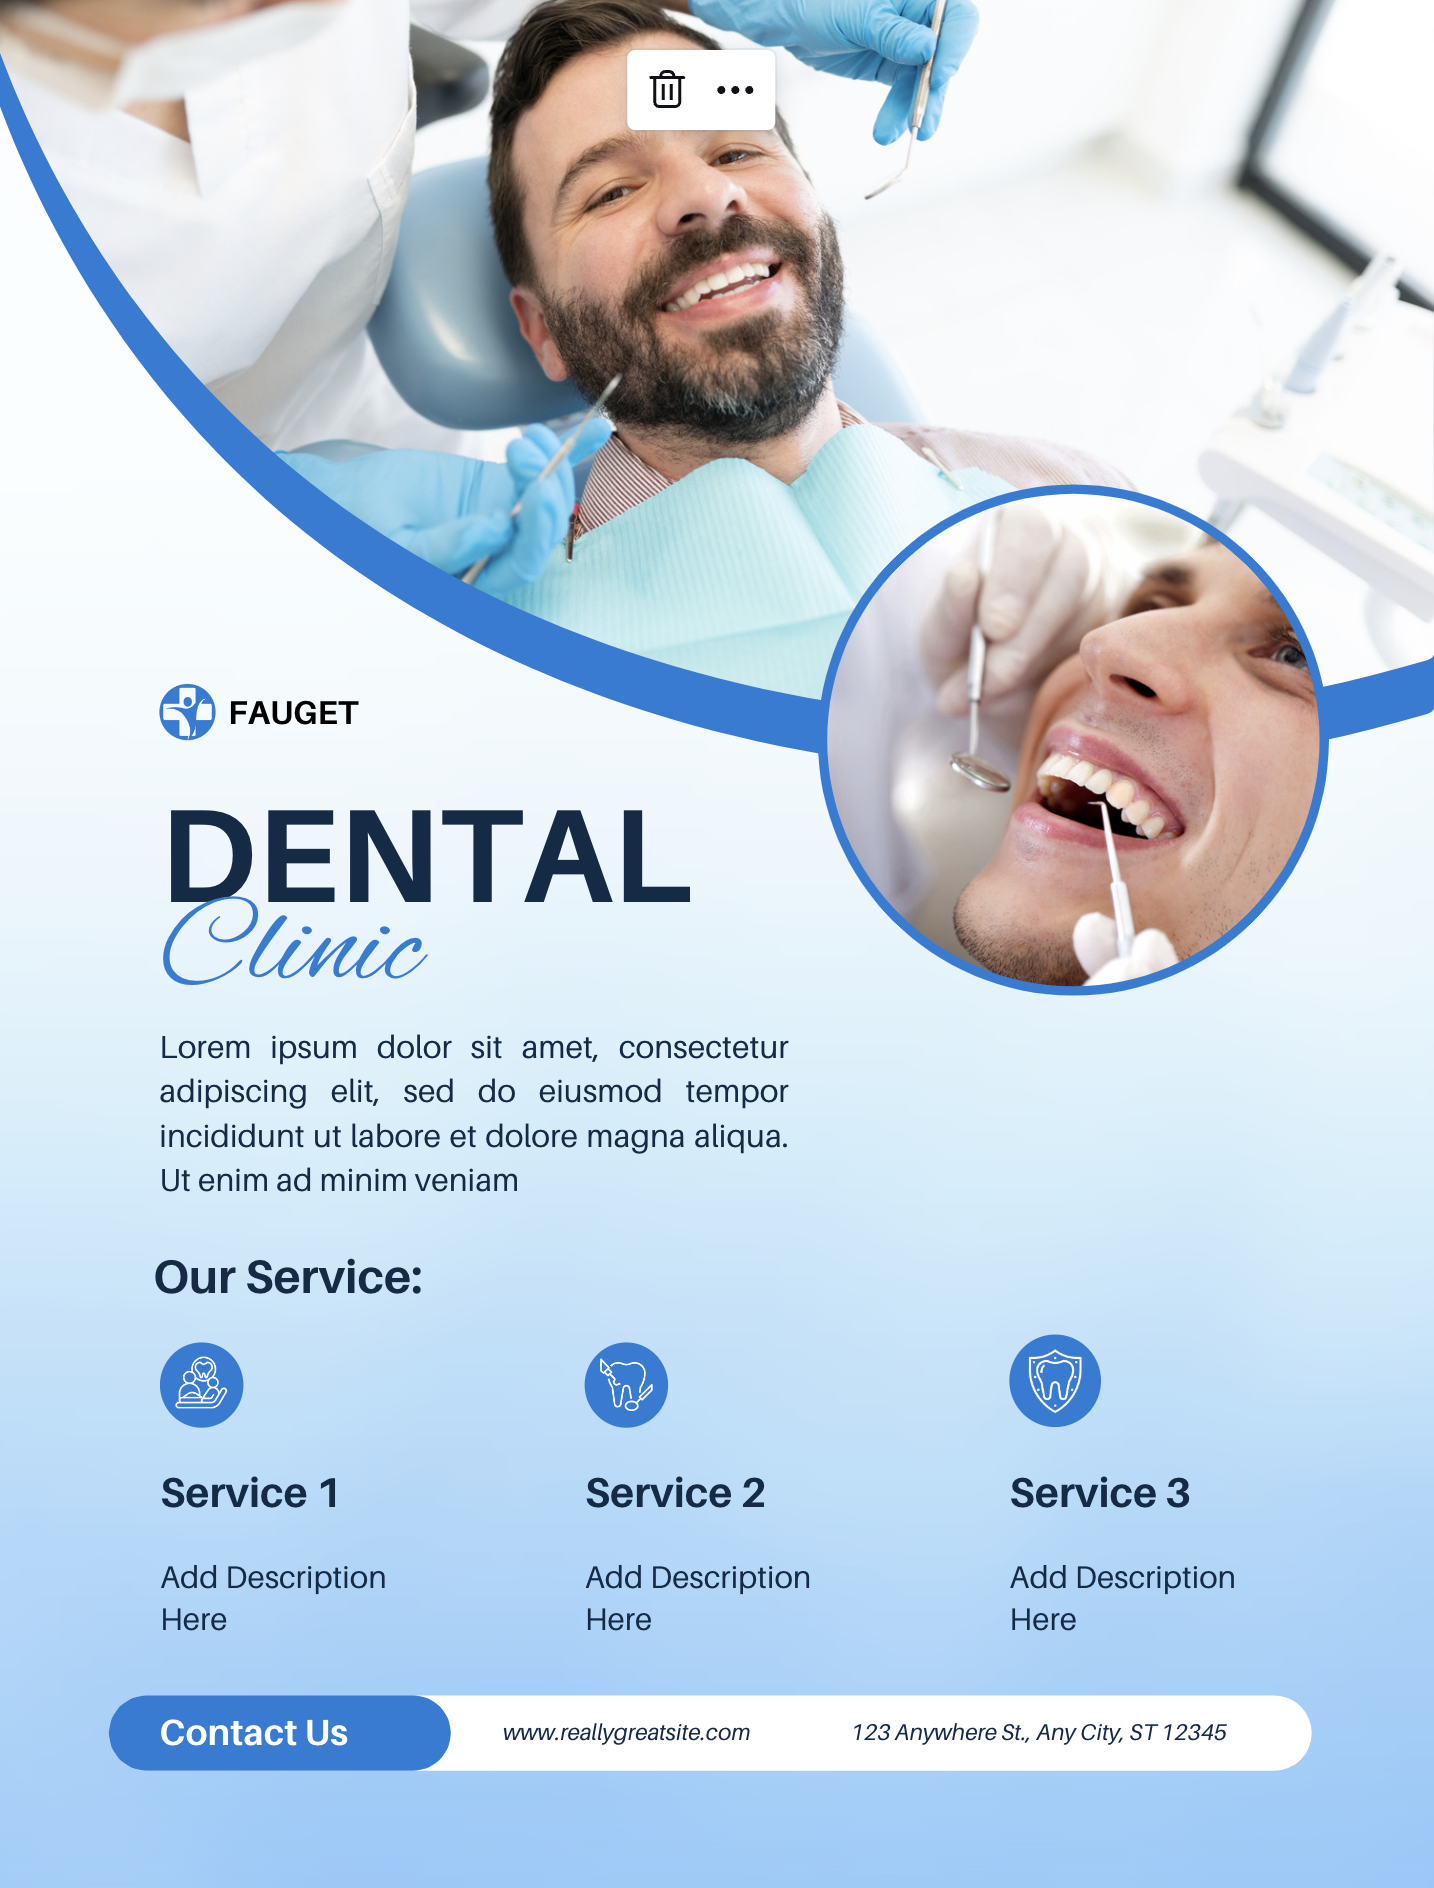 Example of dental flyer